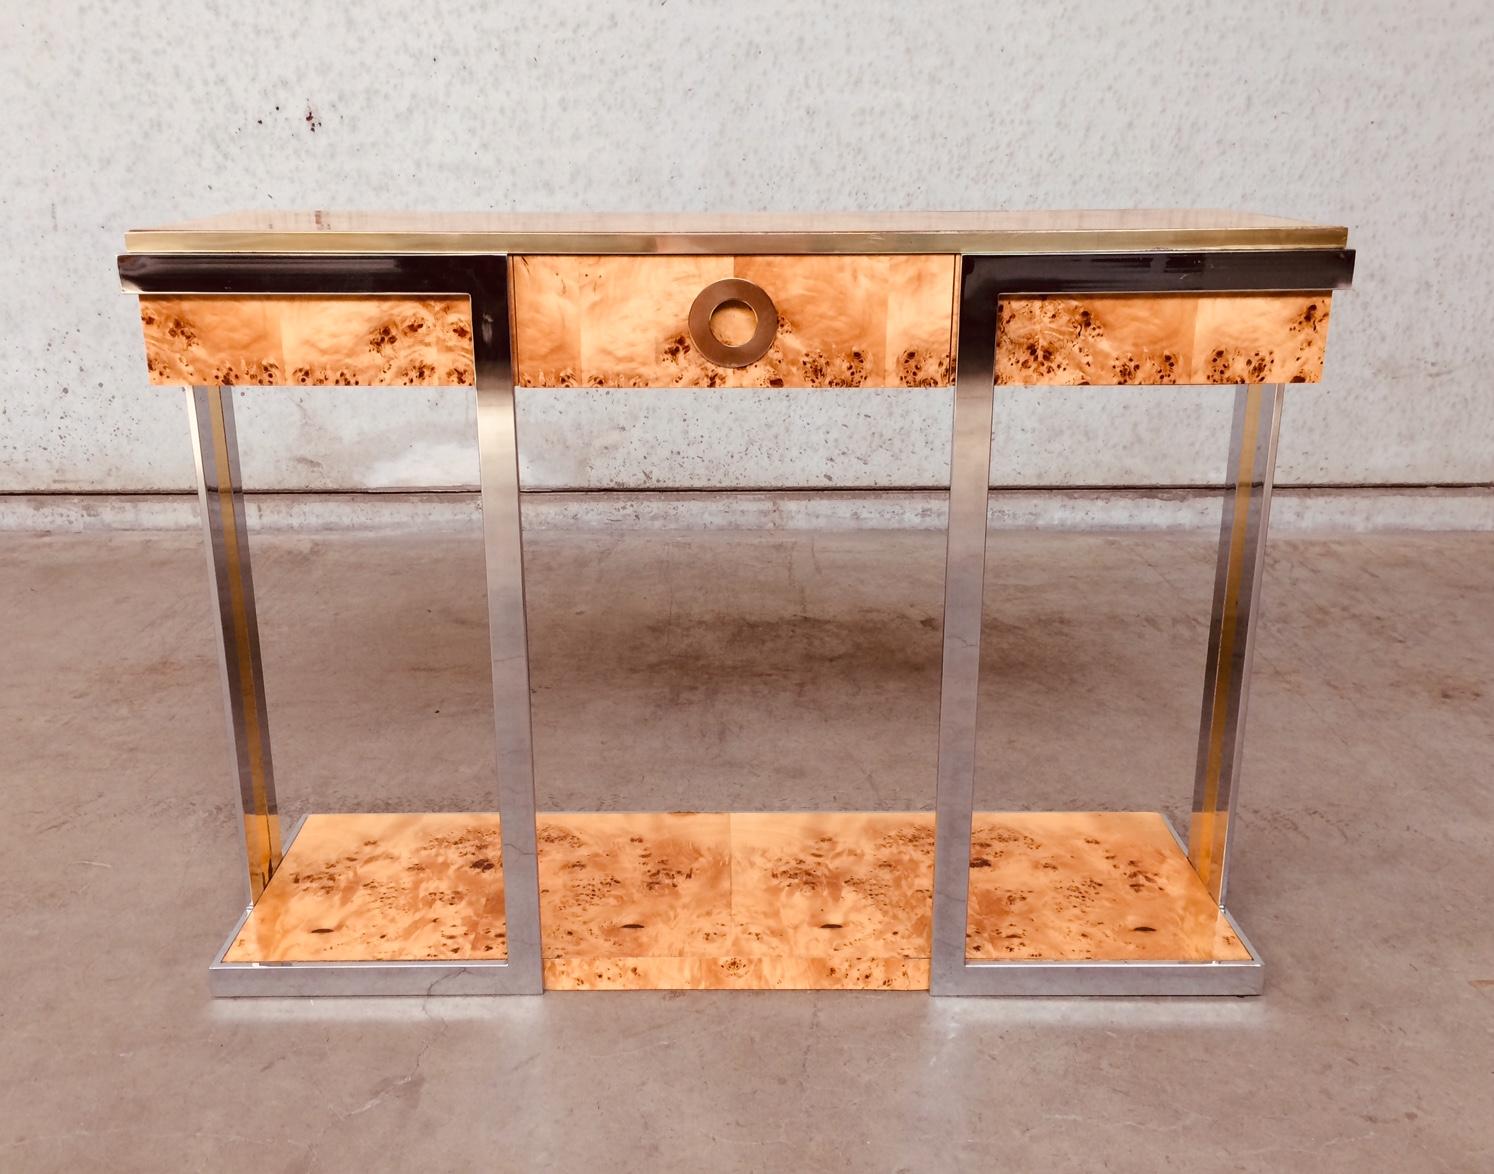 Vintage Mid-Century Modern Design Hollywood Regency Style Luxurious and exceptional console by Willy RIZZO in burl elm with brass, « Alveo » Range by Willy Rizzo.
Retailed by the Italian company Mario Sabot from 1972. 
Veneered in quality burl elm